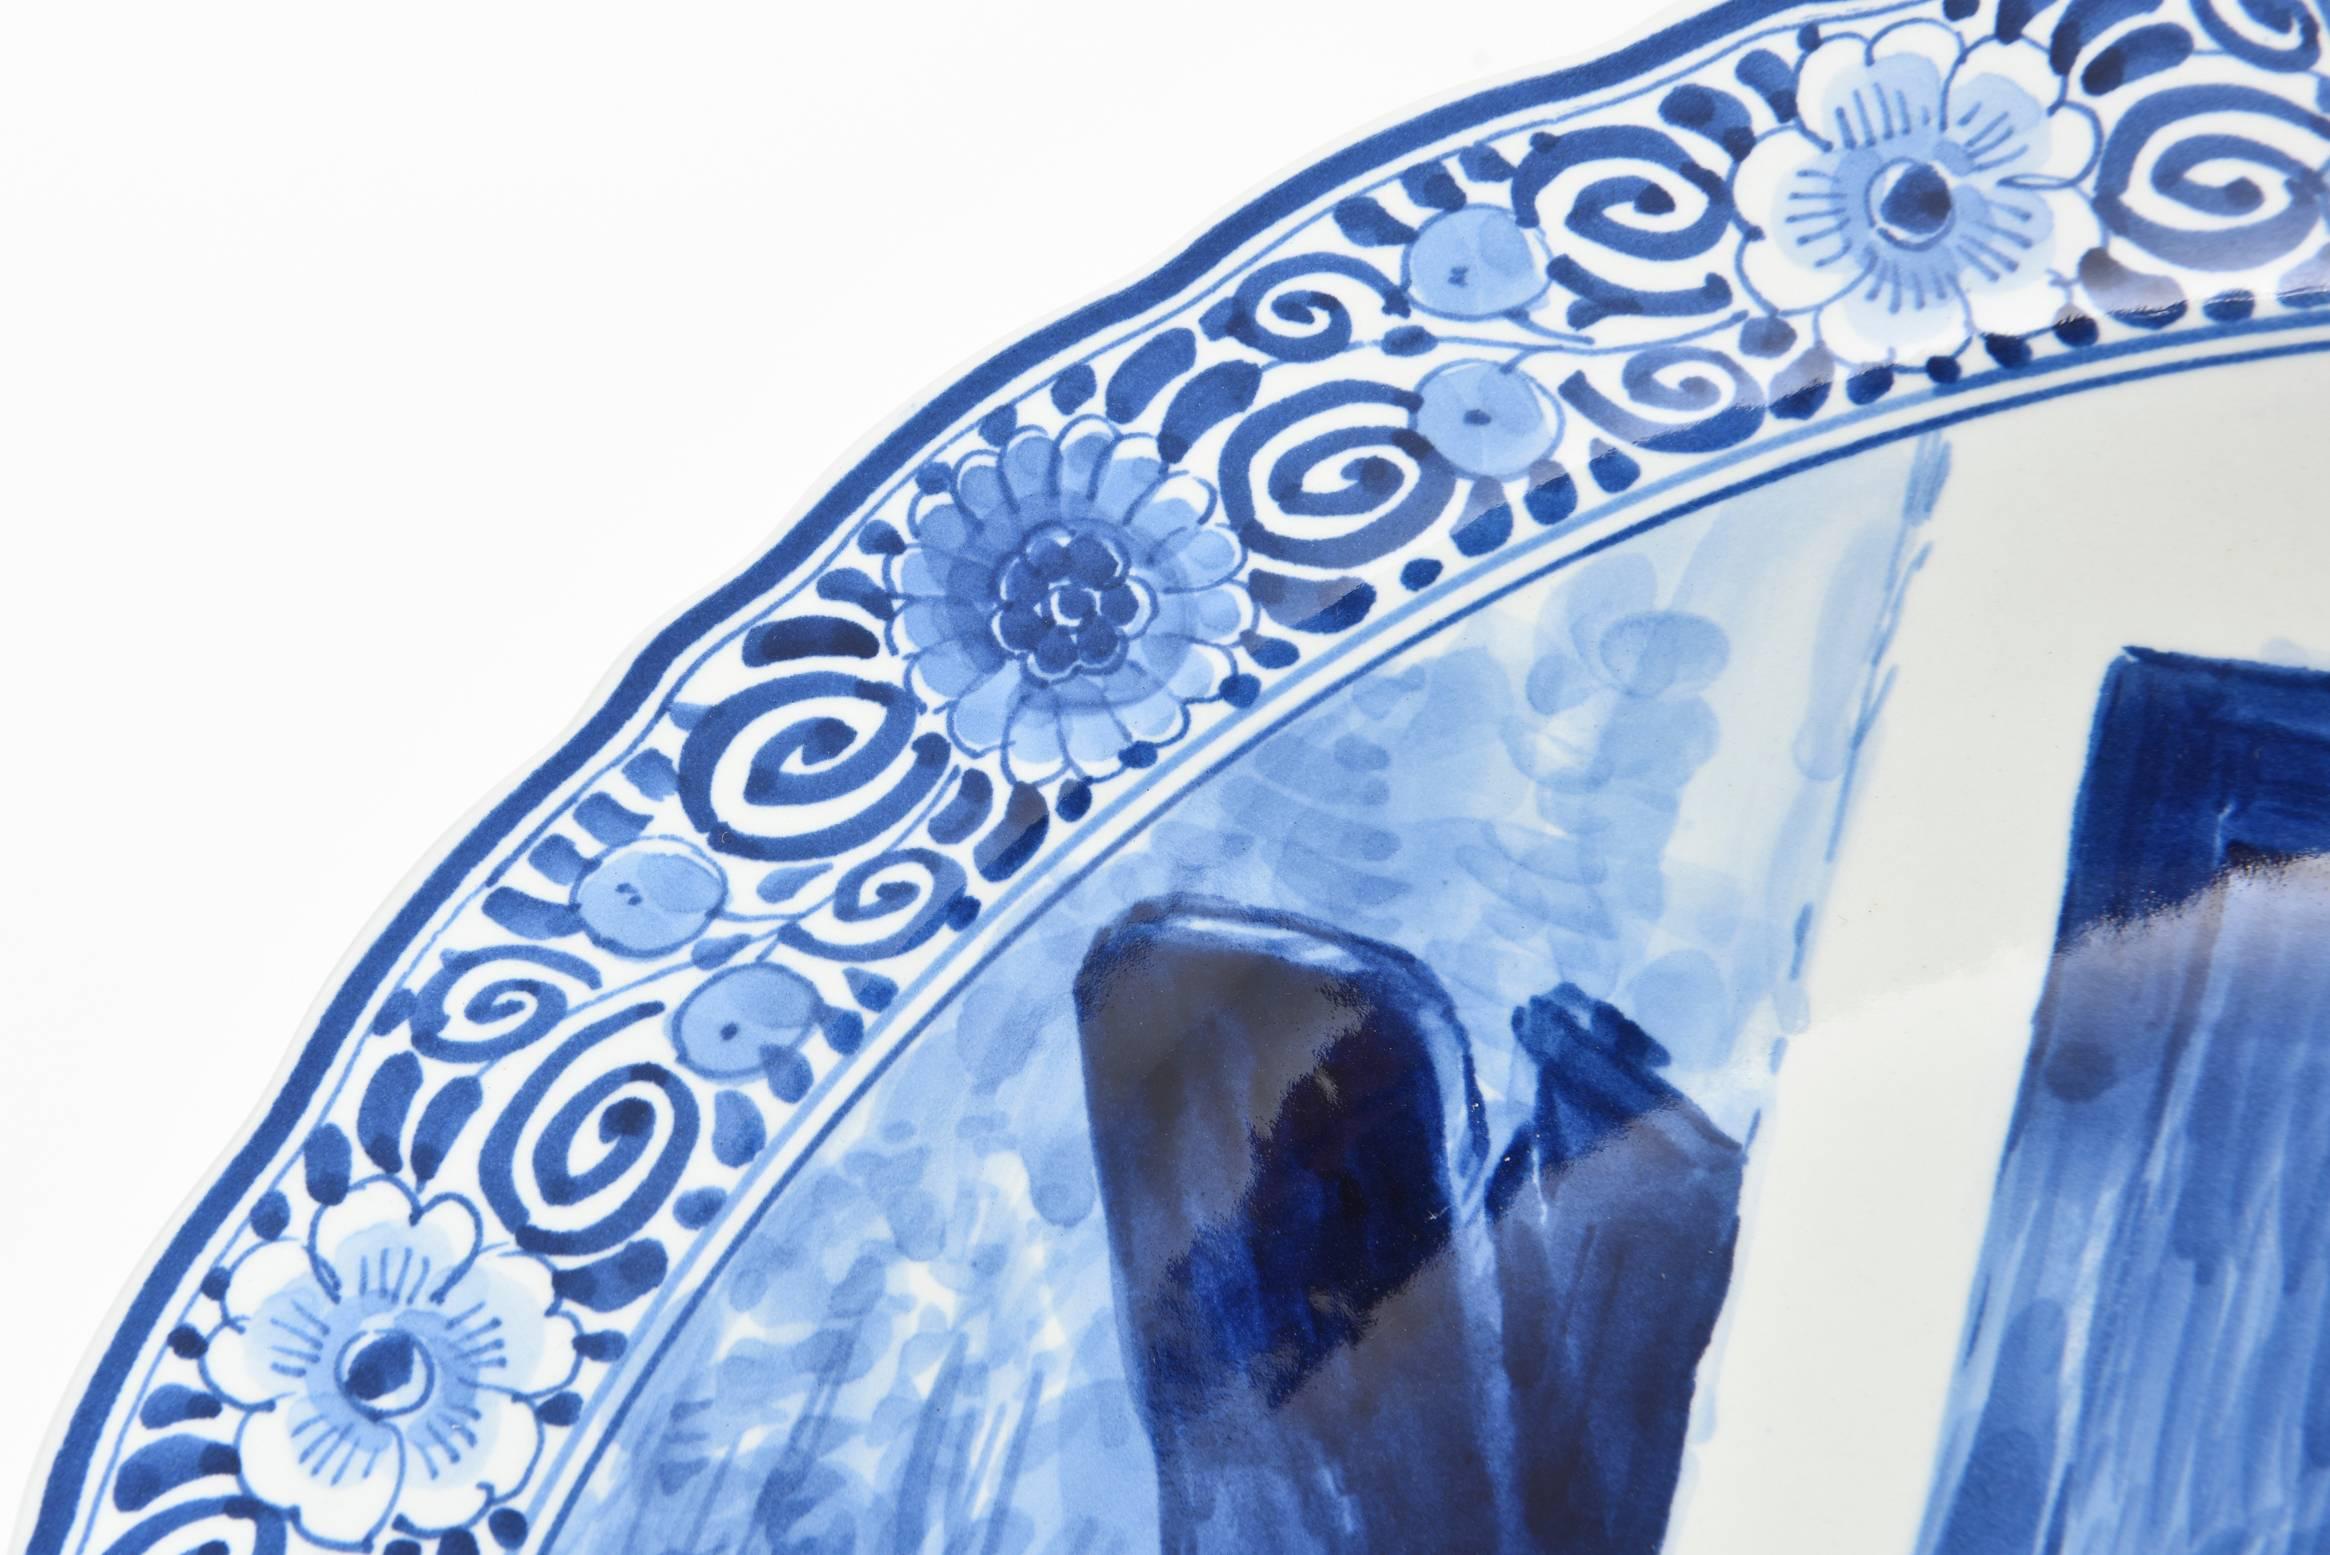 This impressive Delft Blue and white ceramic charger or plate was produced in the 20th century at De Porceleyne Fles (now Royal Delft). The image is after a painting by Dutch painter Bernardus Johannes Blommers (1845-1914). The image is titled 